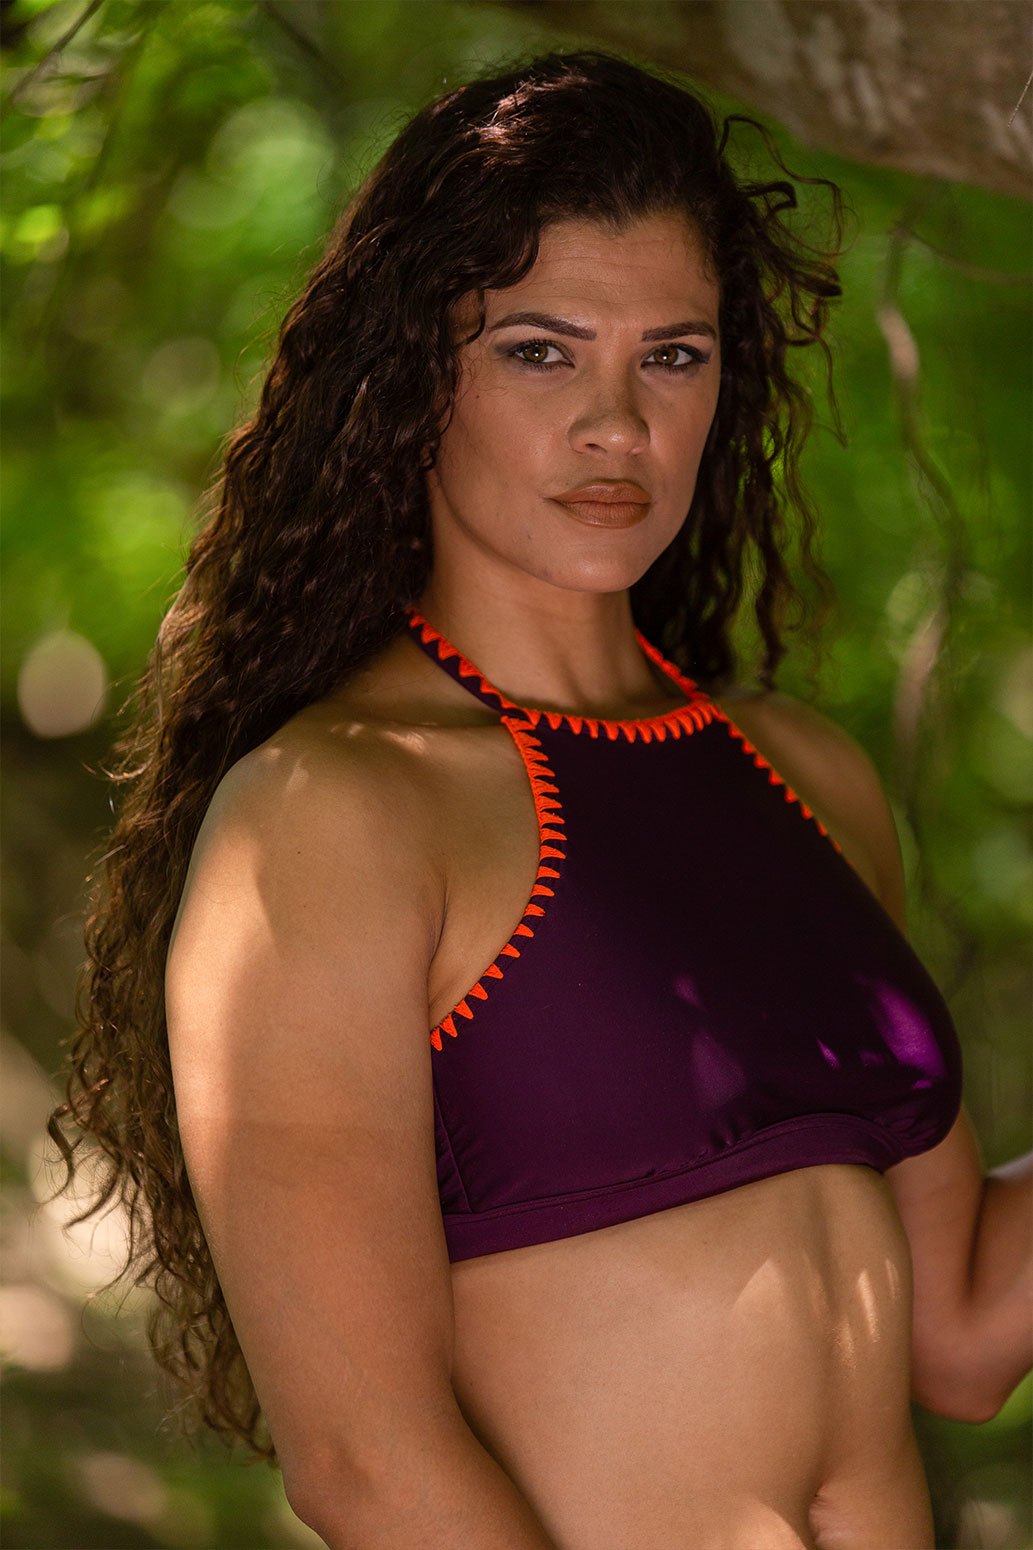  Survivor South Africa Return Of The Outcasts Steffi